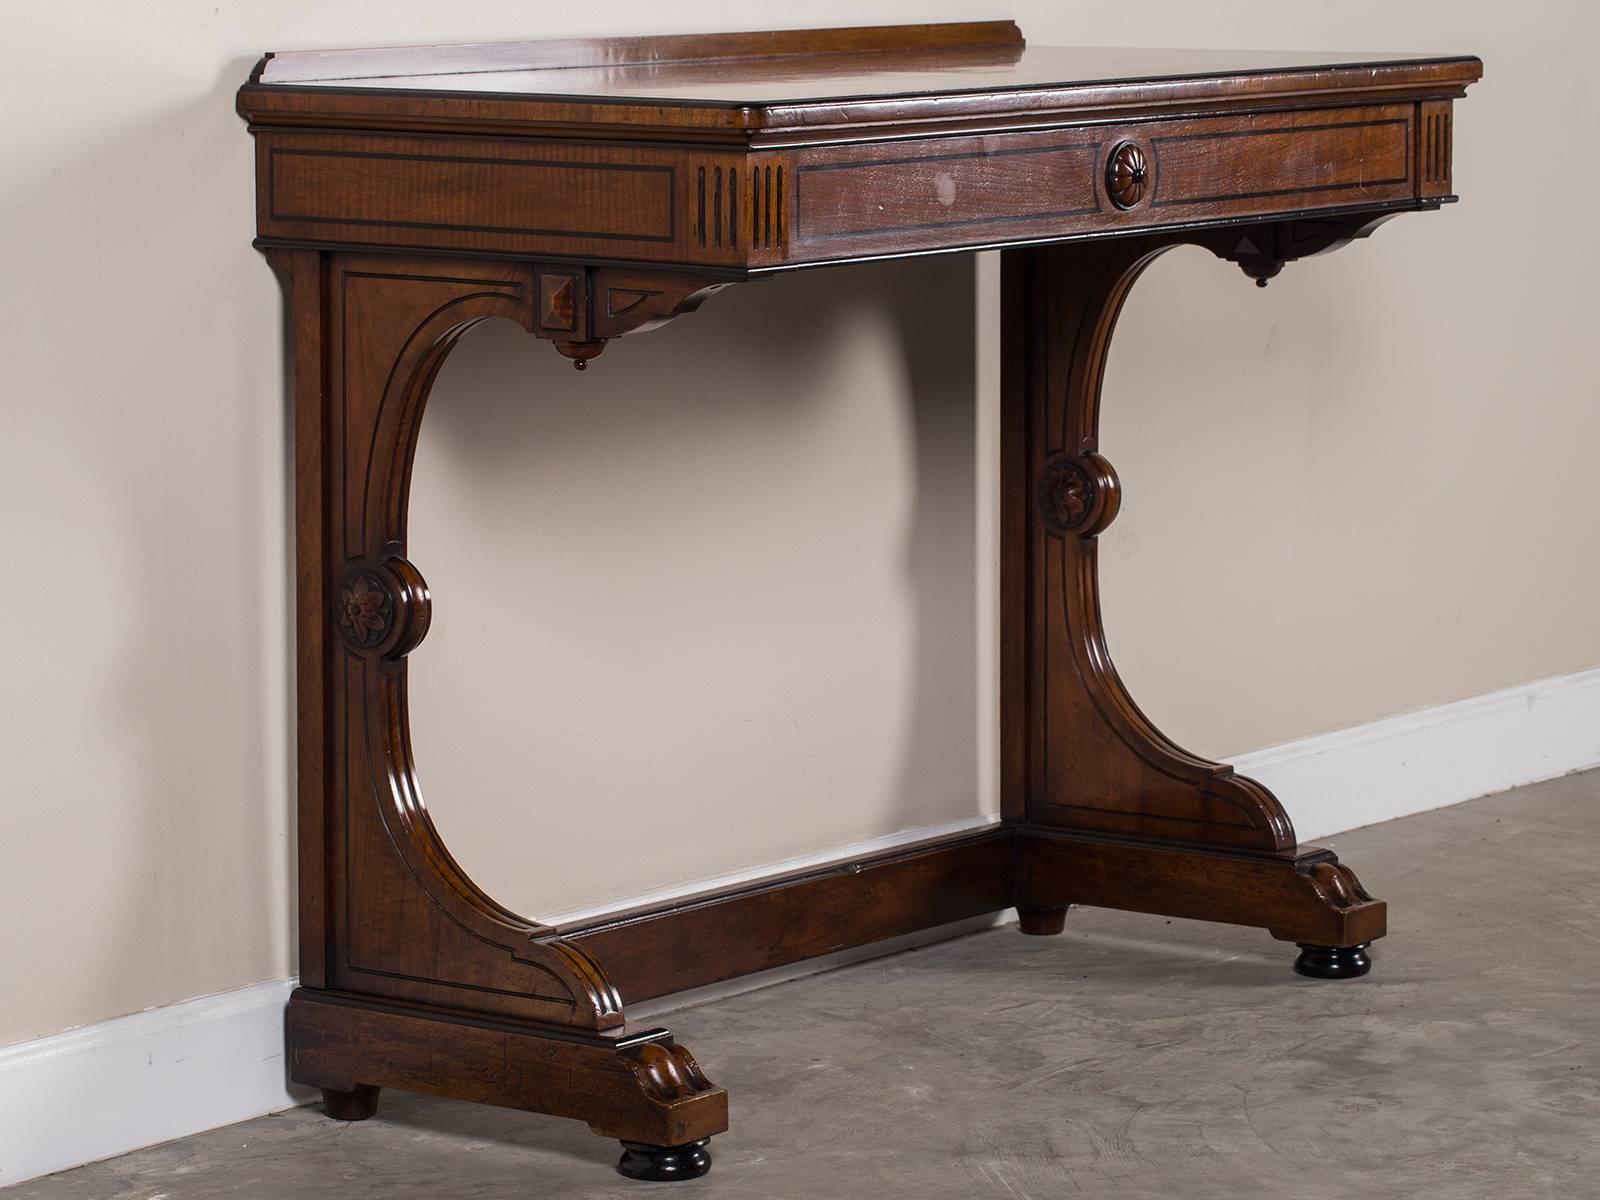 This elegant antique English mahogany console table, circa 1865 is embellished with ebonized wood stringing. The elegant sweep of the legs showcases the dramatic curved profile while enhancing the rounded corners of the top and front of the legs.